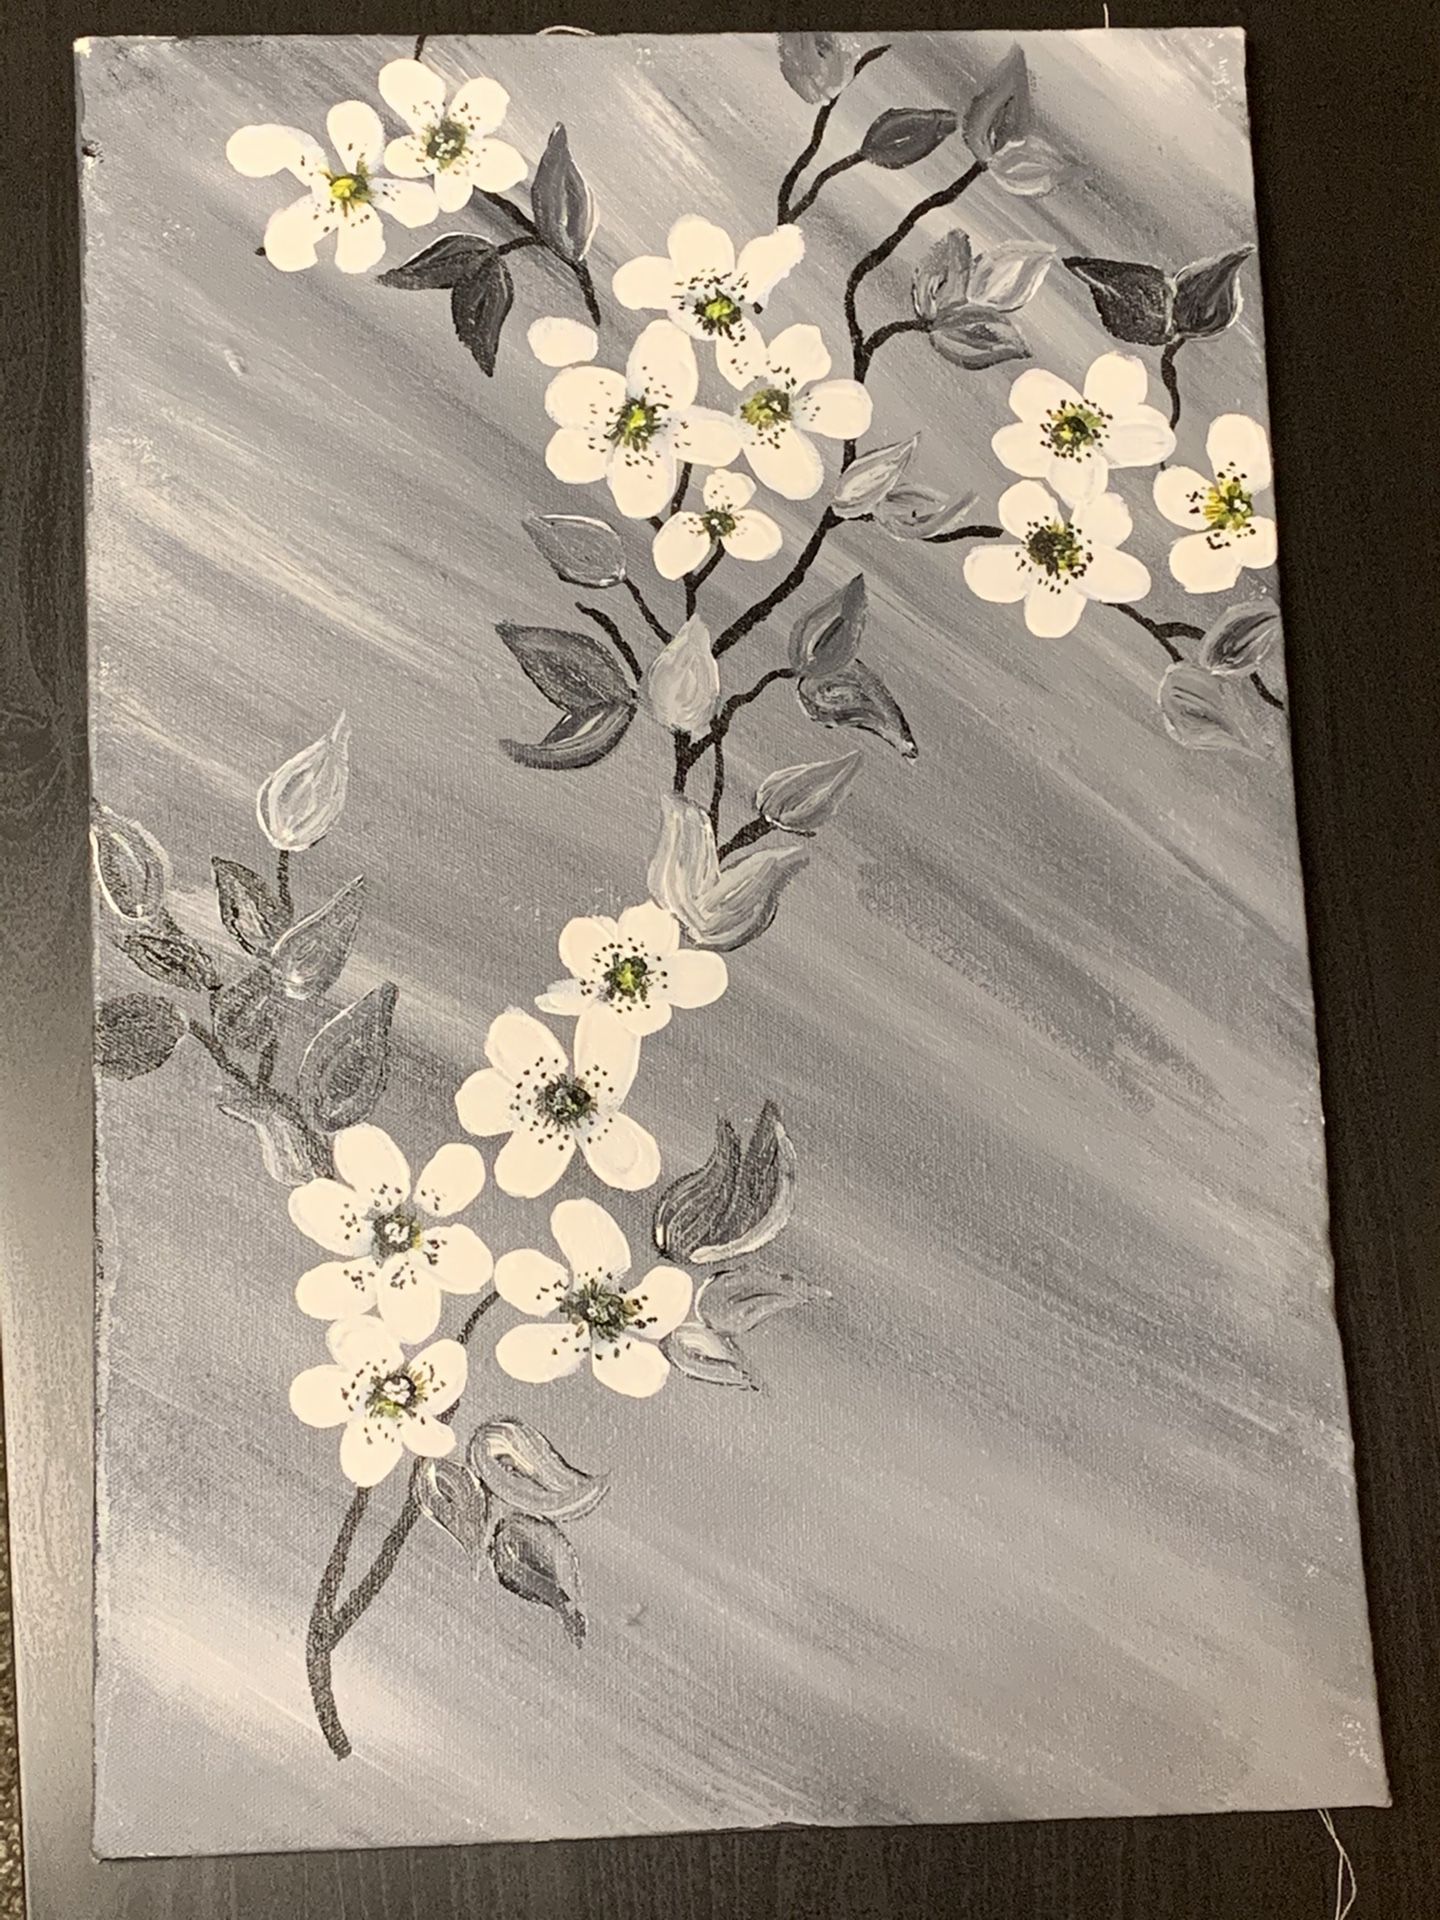 Acrylic painting on Stretched canvas